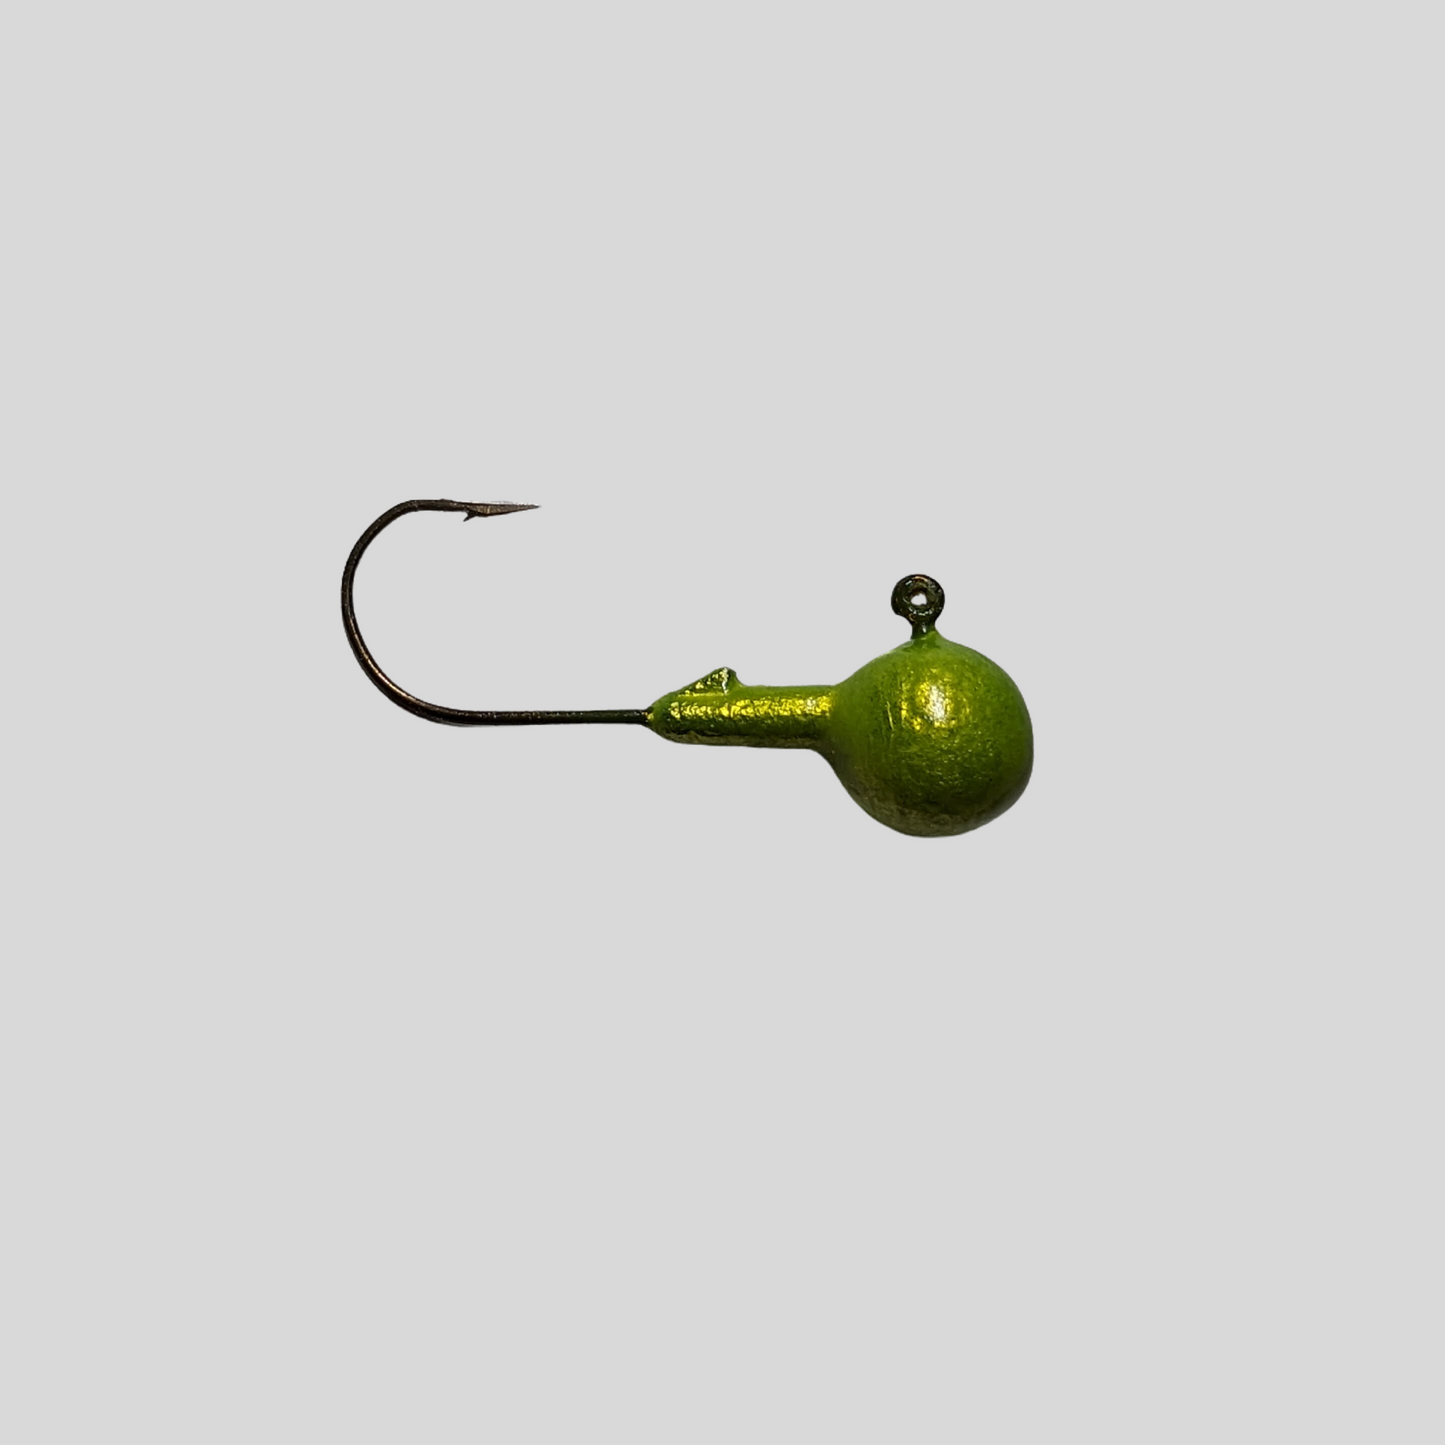 Round ball jig with bait keeper lead free green glow in the dark